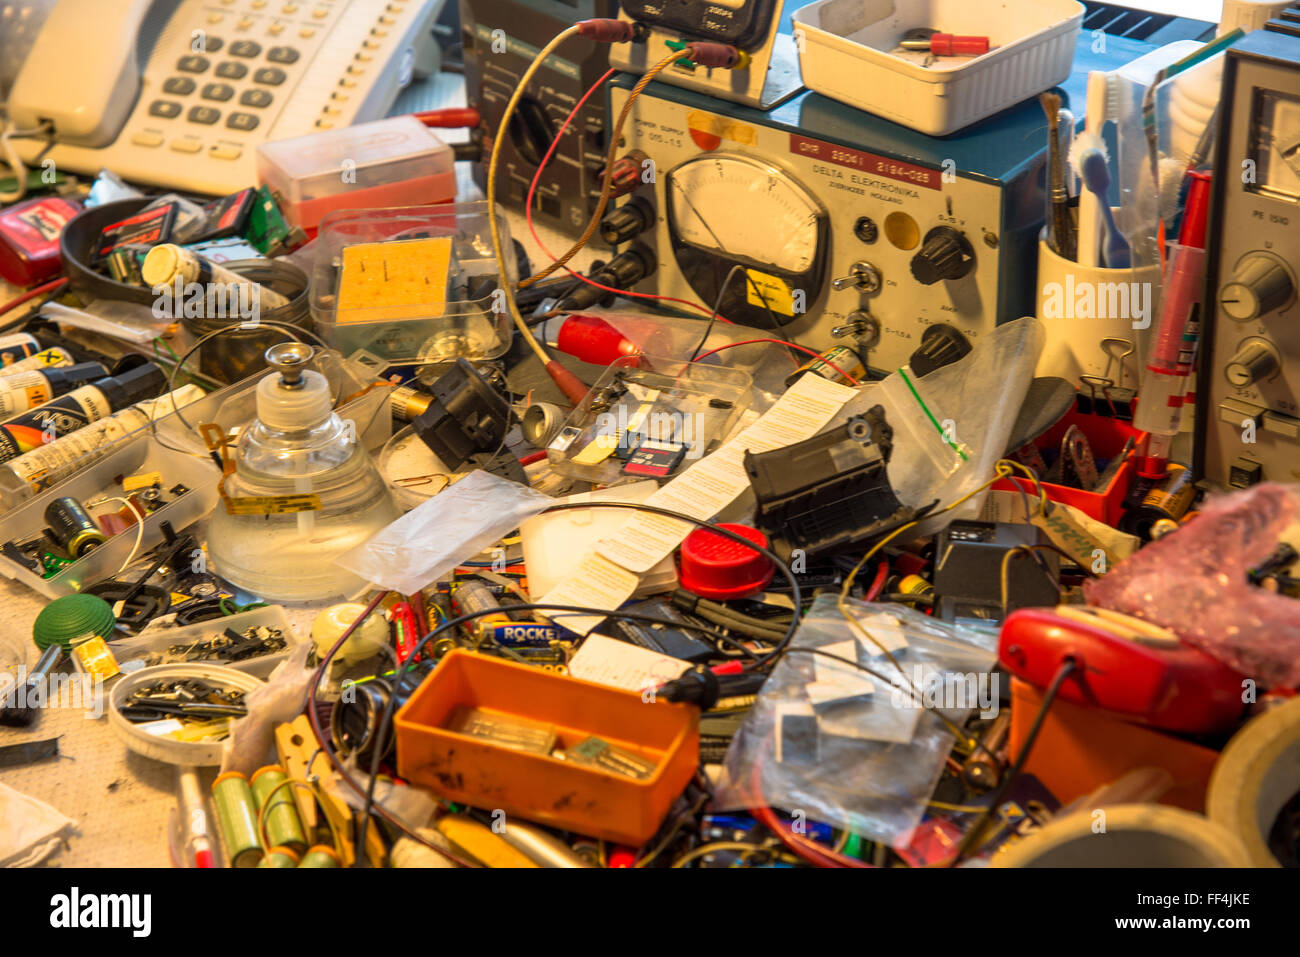 messy workplace at repairshop Stock Photo